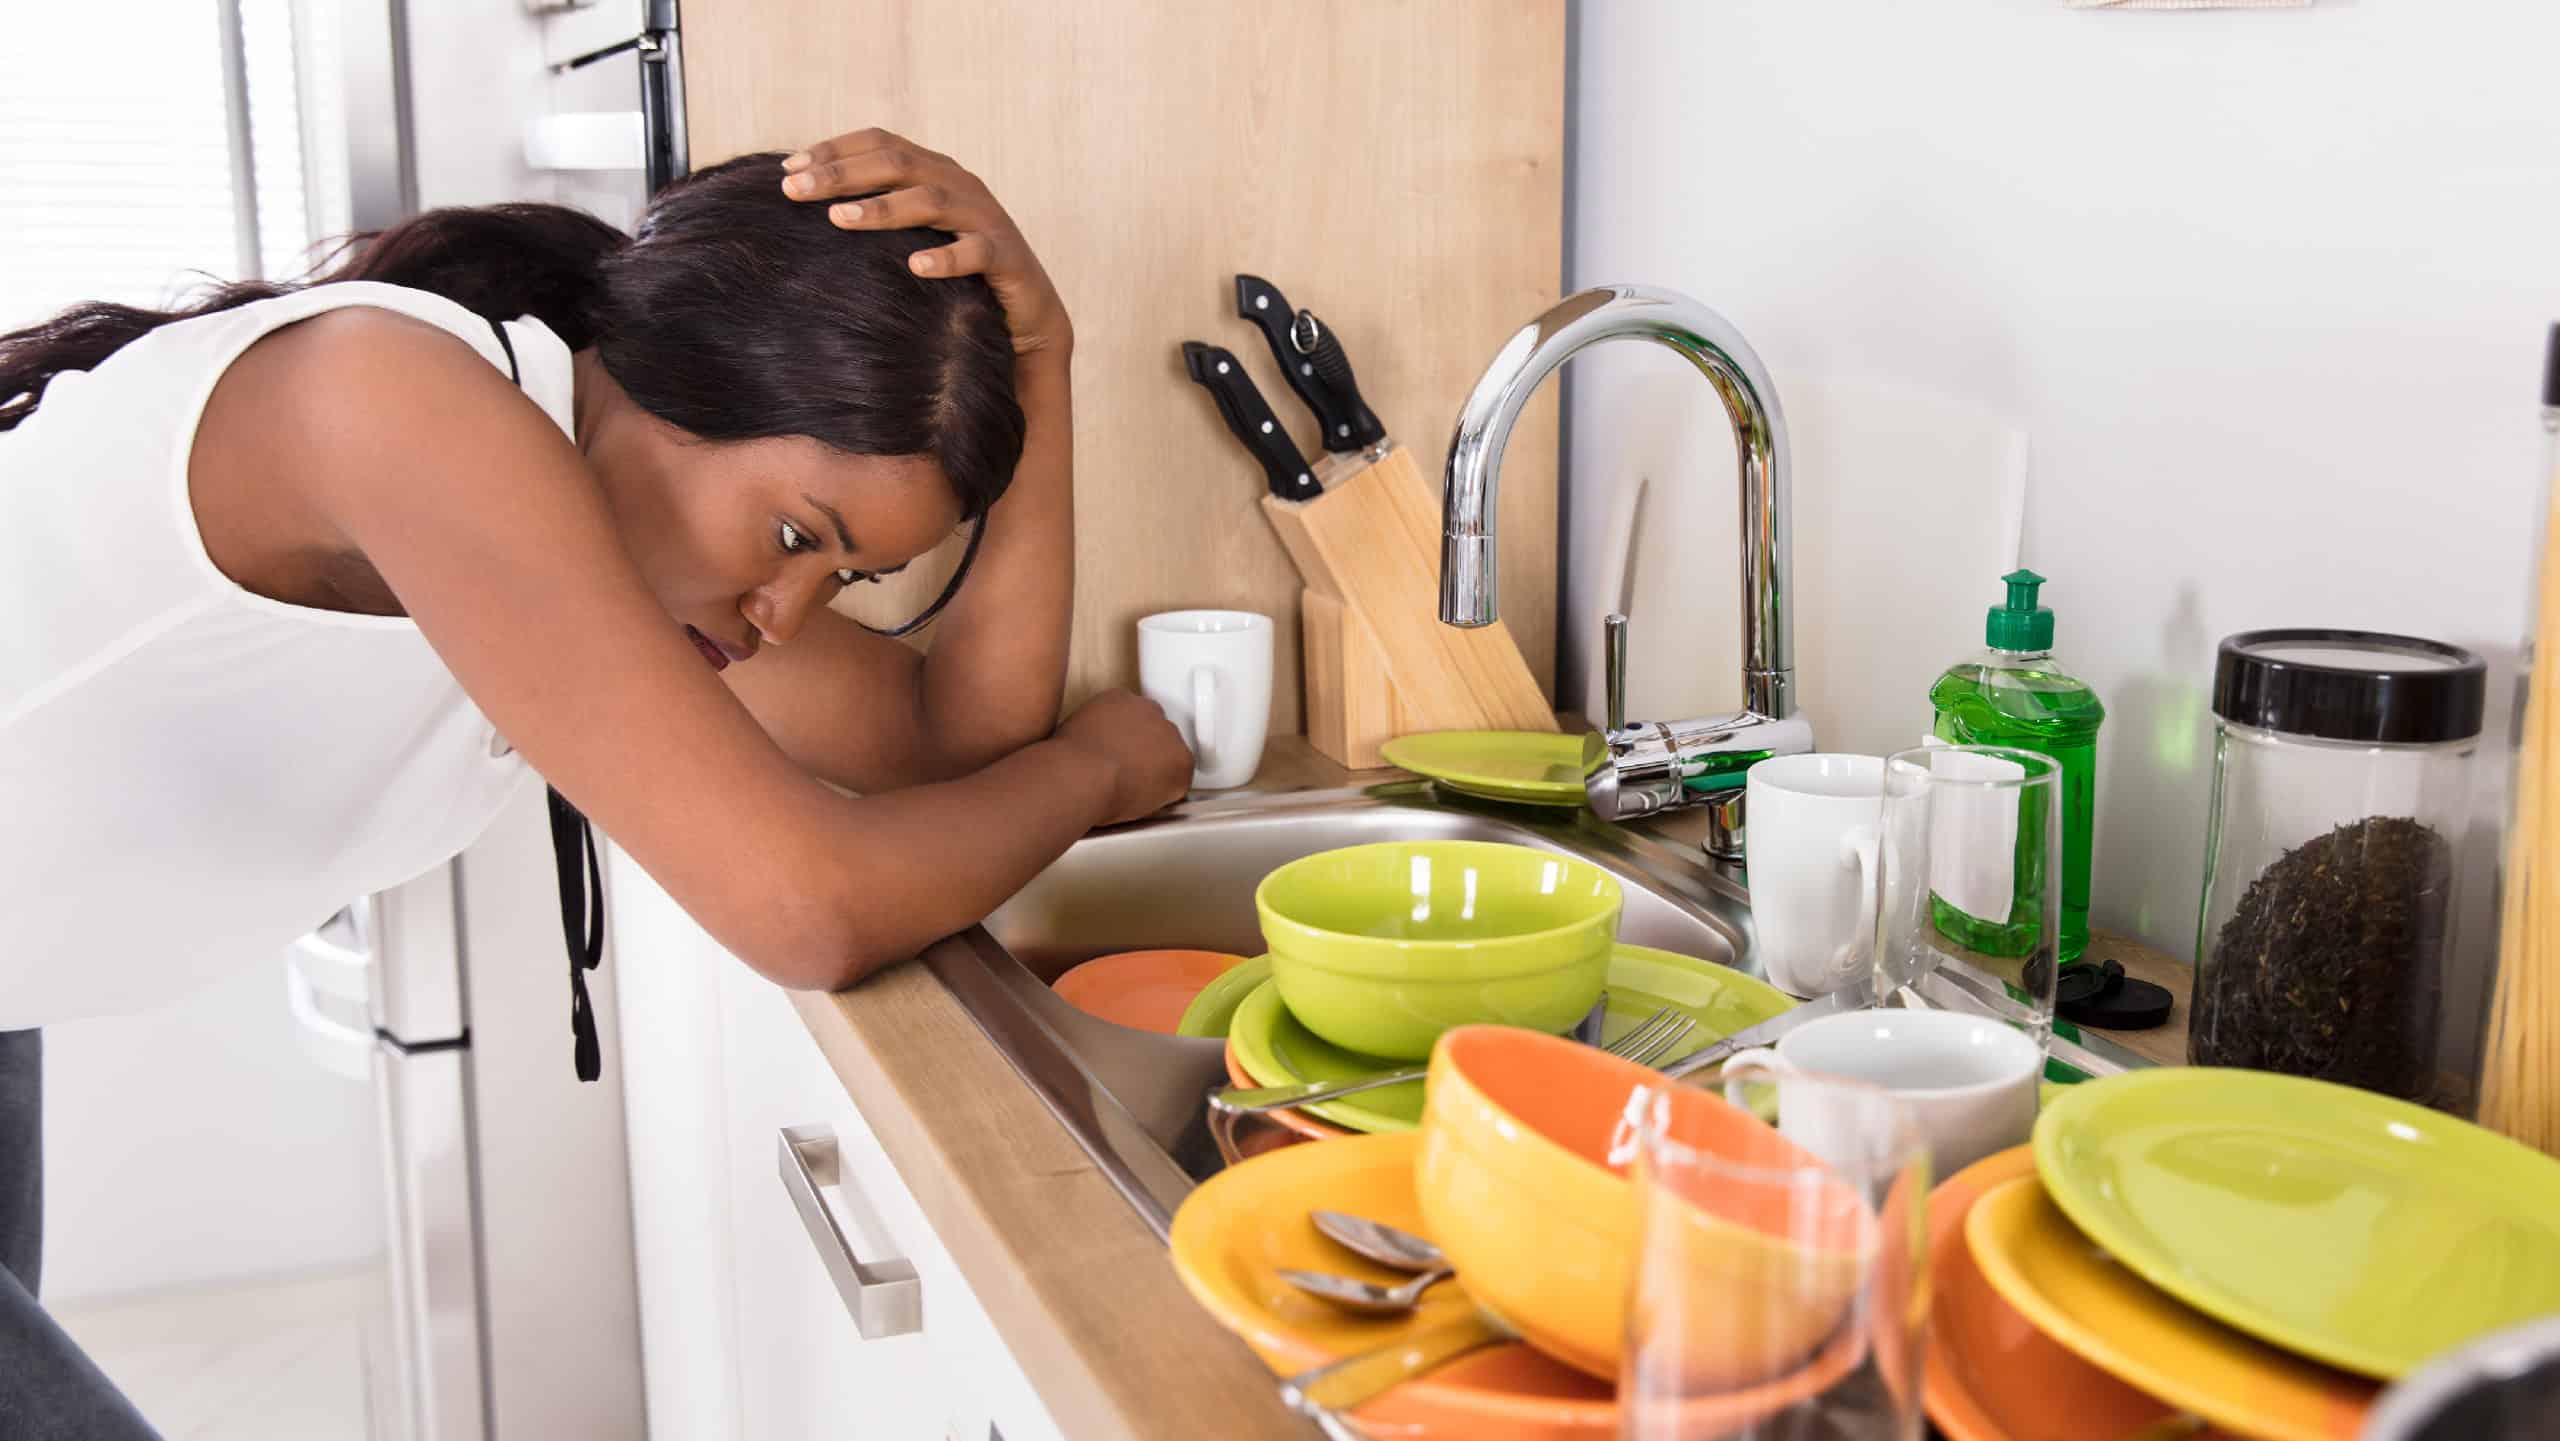 A Simple Scrub customer confronts piles of dirty dishes during her pre-date cleaning routine.